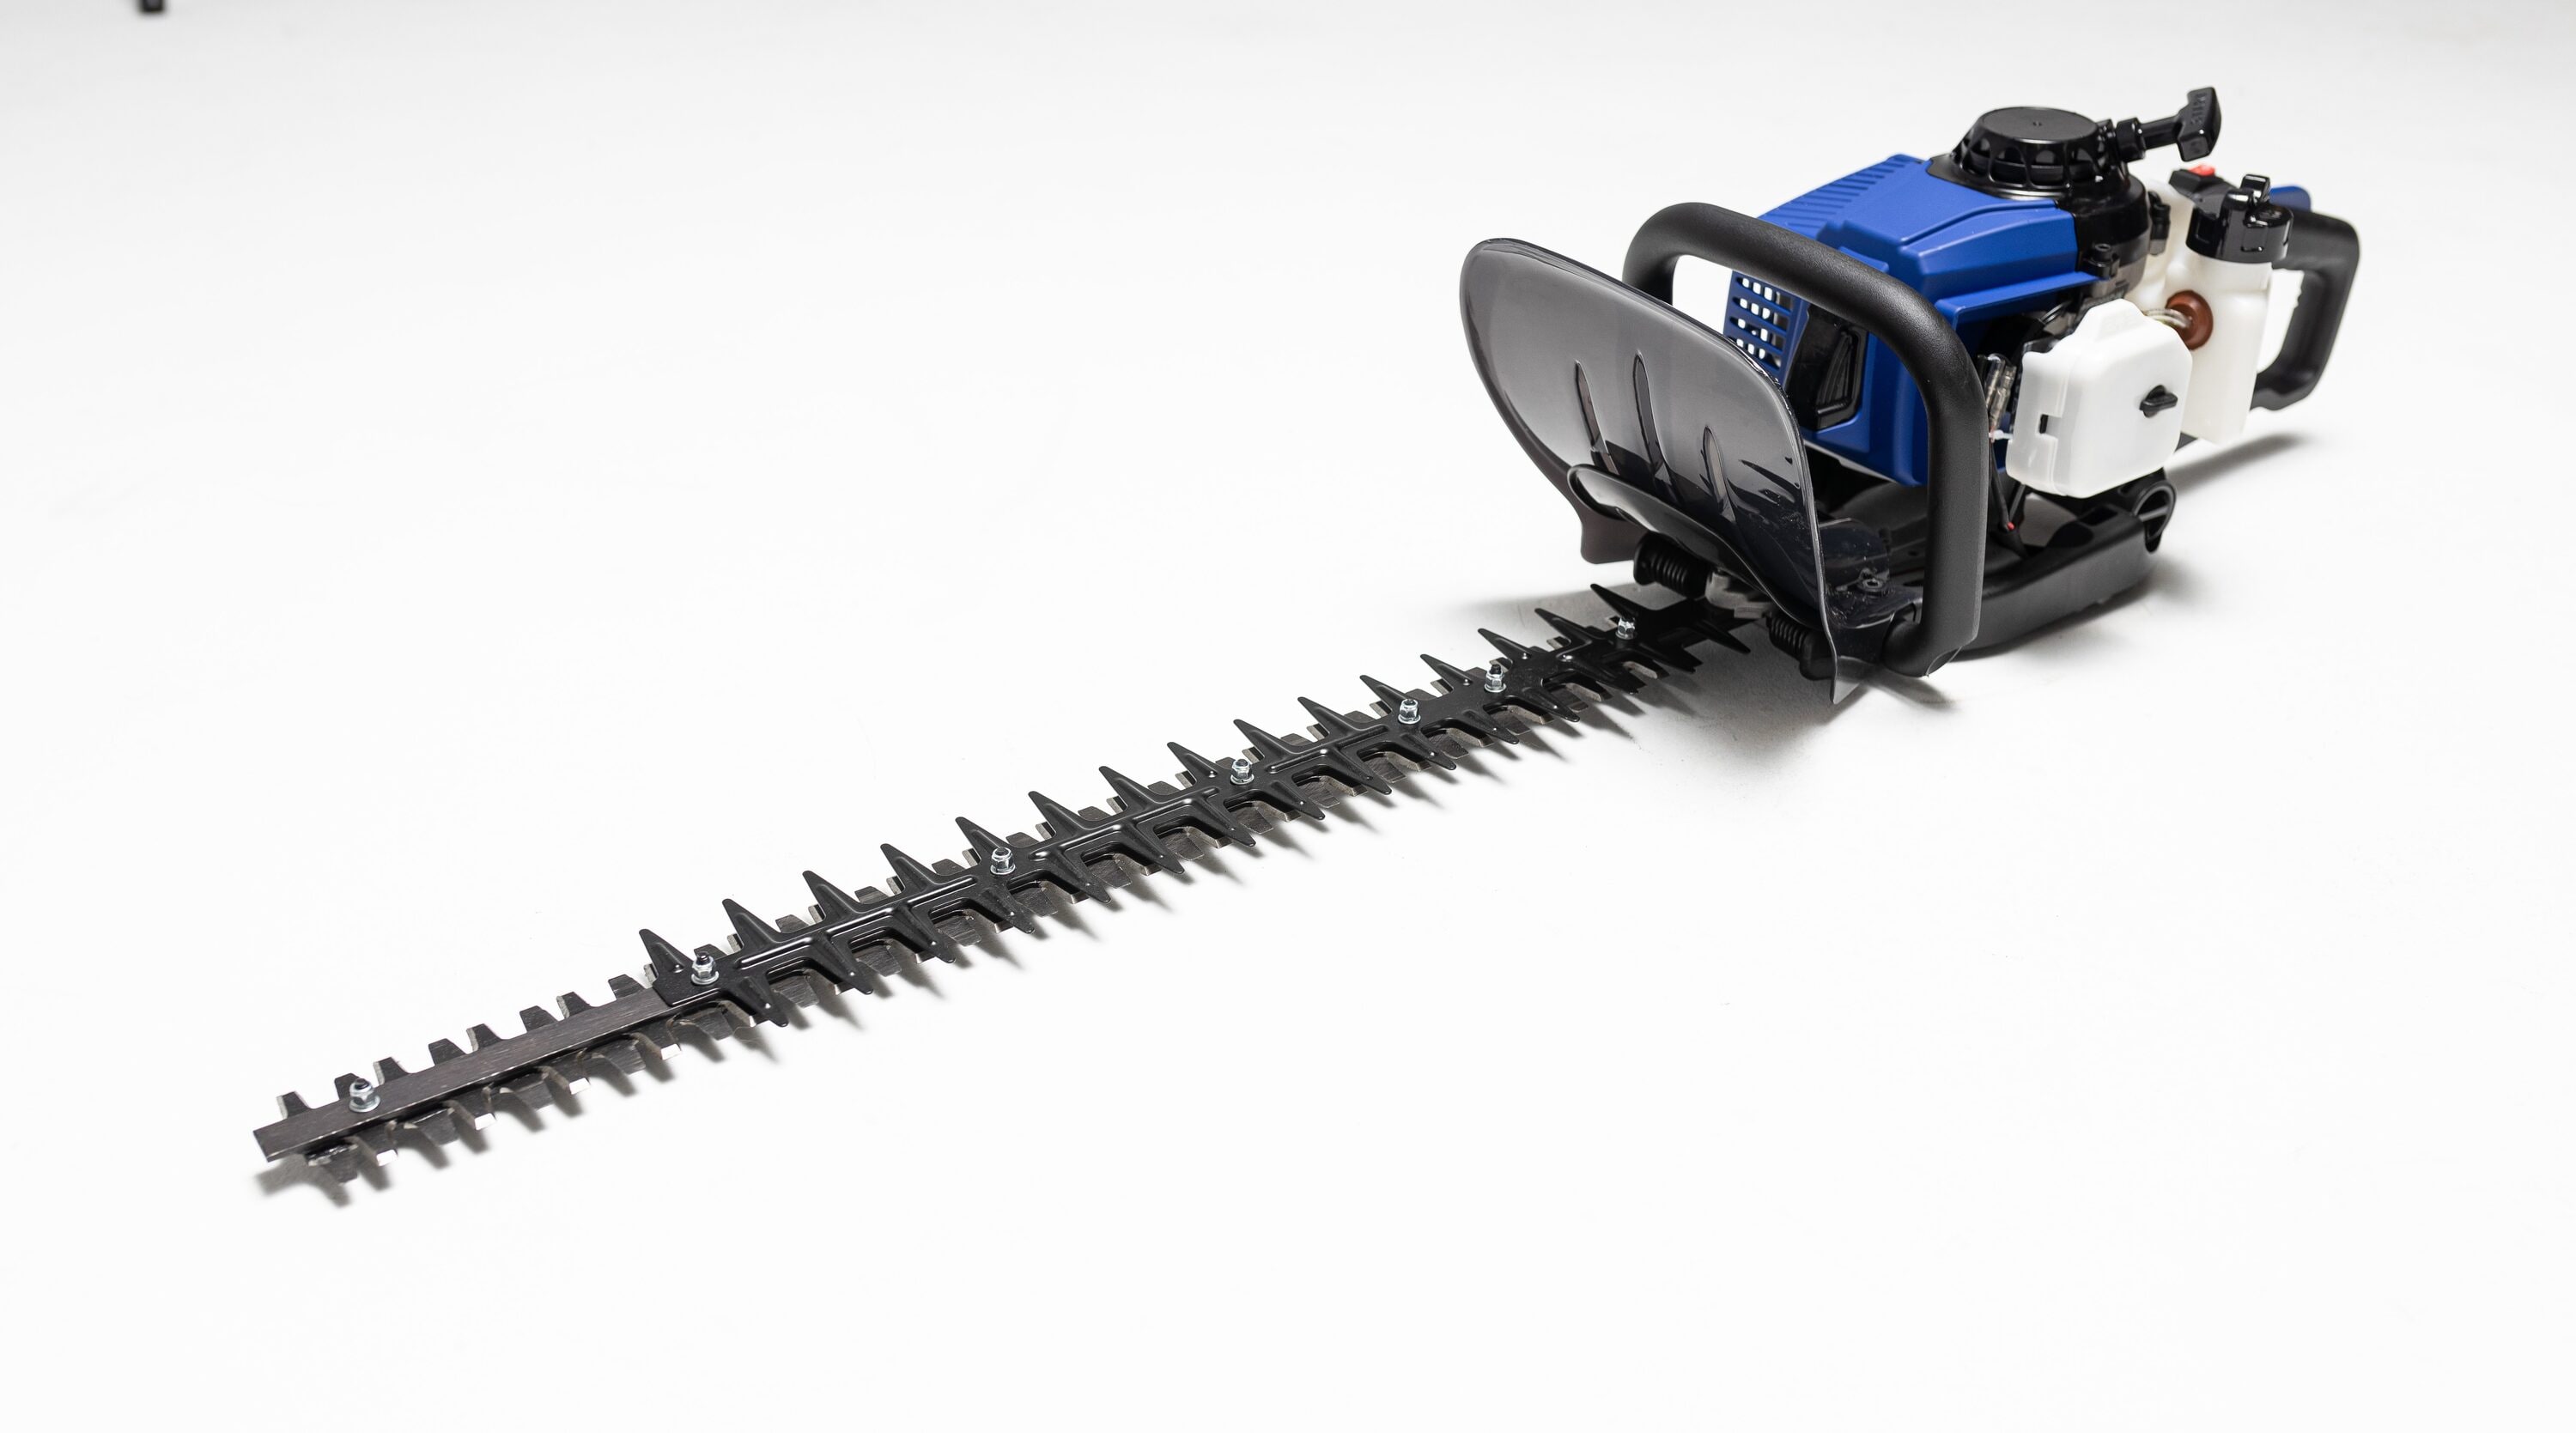 Wild Badger Power Gas 26-cc 2-cycle 22-in Dual-Blade Gas Hedge Trimmer in Gas Hedge department at Lowes.com